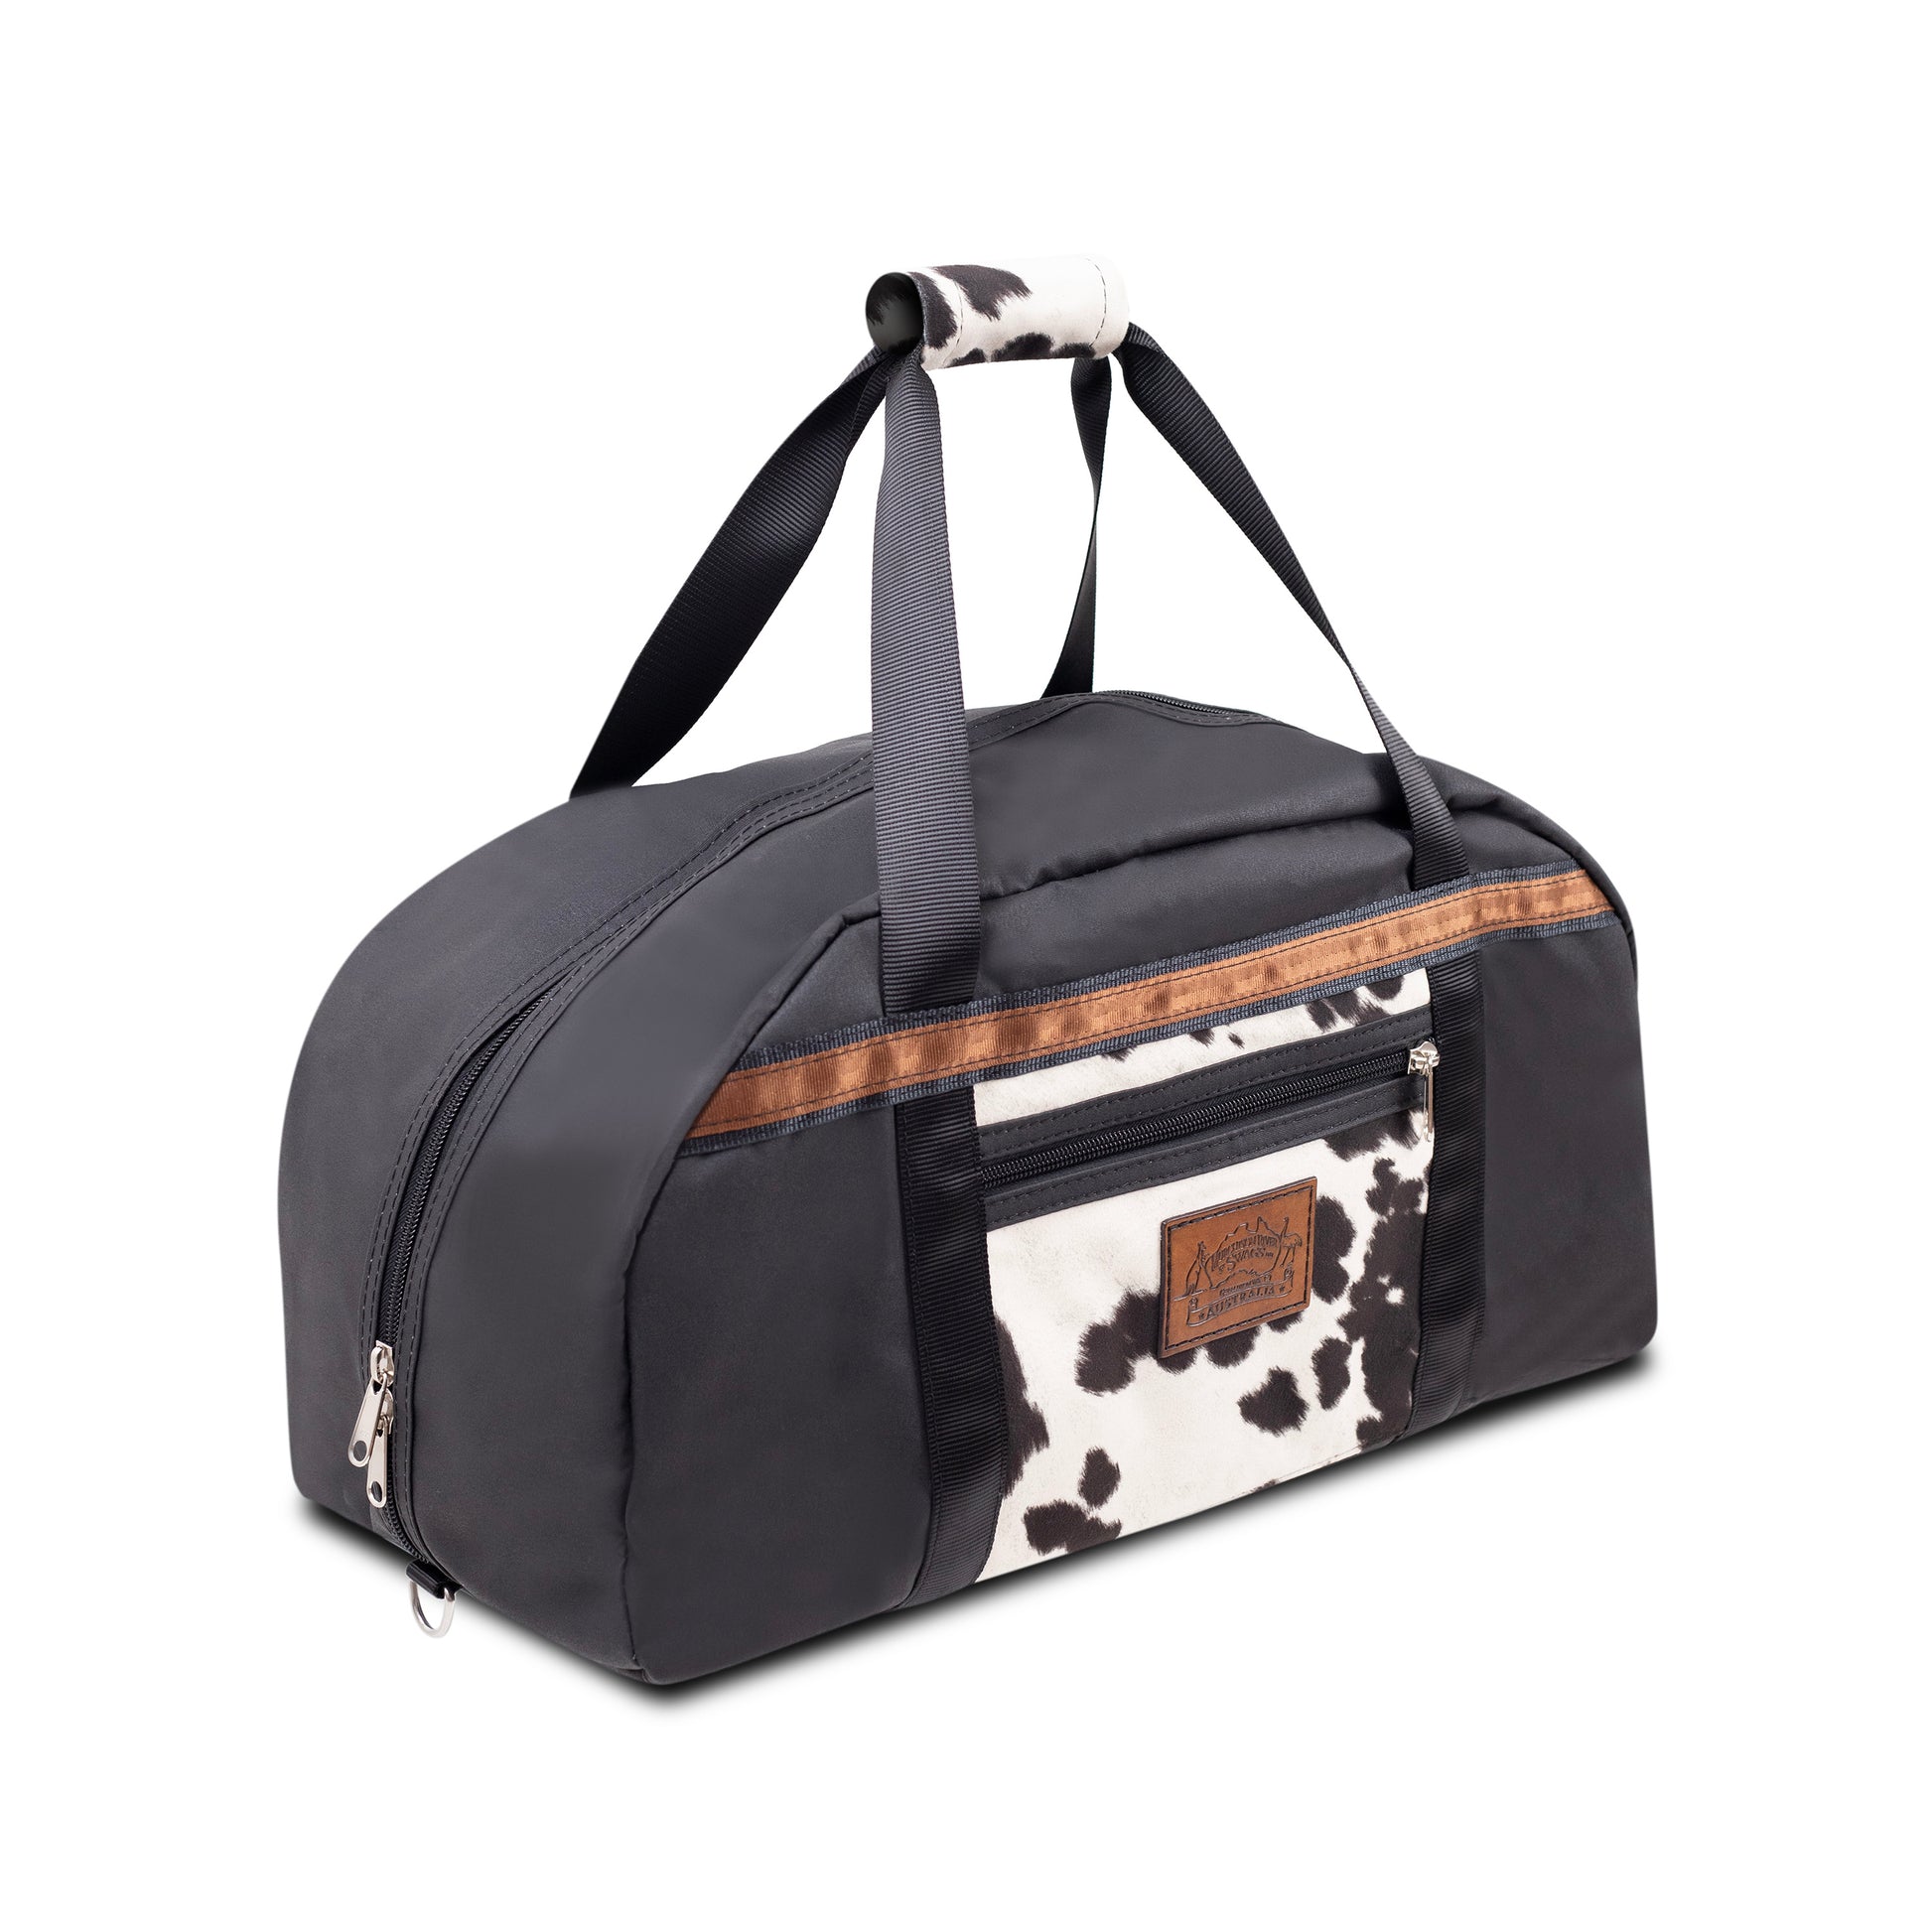 Black Overnight Canvas Bag with limited edition cow print fabric.